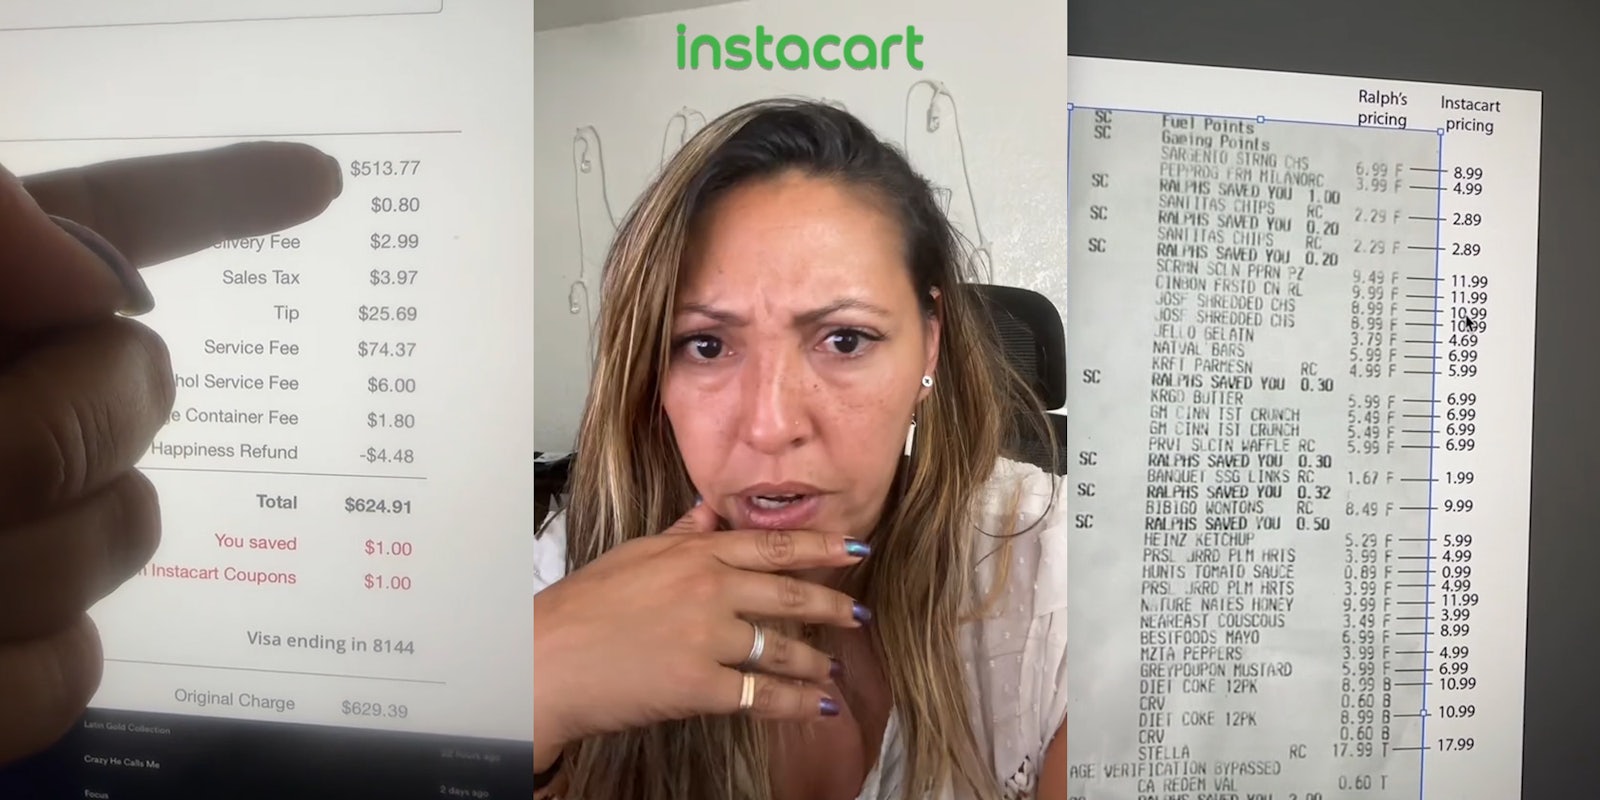 finger pointing to Instacart total with fees (l) Instacart customer speaking with Instacart logo above (c) receipt with price comparisons between Ralph's and Instacart (r)